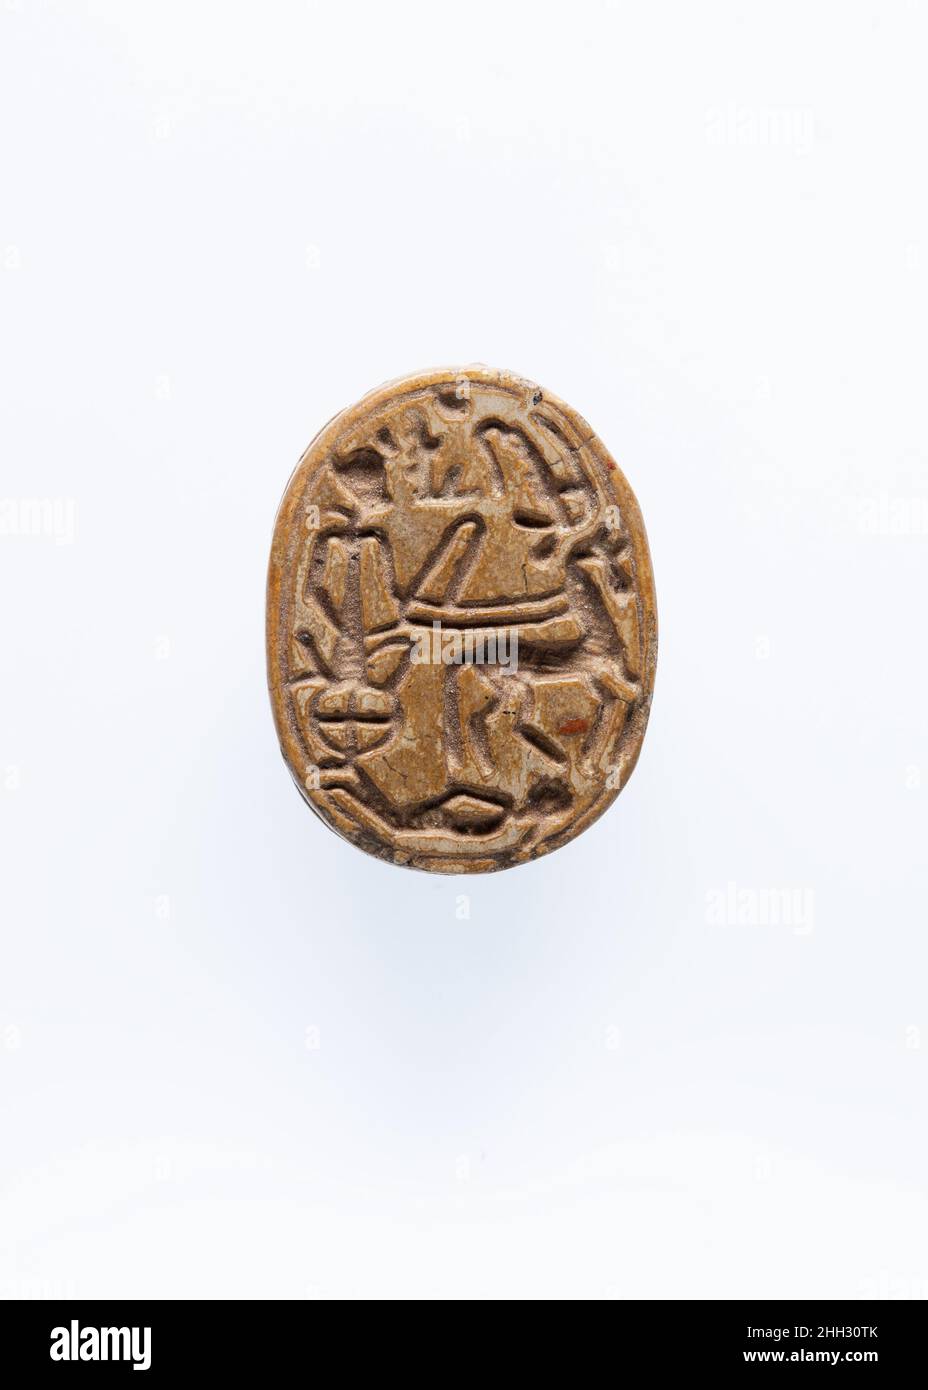 Scarab ca. 1153–1147 B.C. New Kingdom, Ramesside The scarab was shaped like a dung beetle, 'scarabaeus sacer,' which is also the source of its modern name. The dung beetle was 'kheperer' in ancient Egyptian. Having watched the small creatures push huge balls of dung, the ancient Egyptians compared the sun being pushed into the sky at dawn to the beetle, and they referred to the rising sun as 'Kheperi.' The word for 'to become' or 'come into being' was 'kheper,' and the beetle hieroglyph was used to spell all of these words. As such, the scarab became a powerful amulet for rejuvenation in this Stock Photo